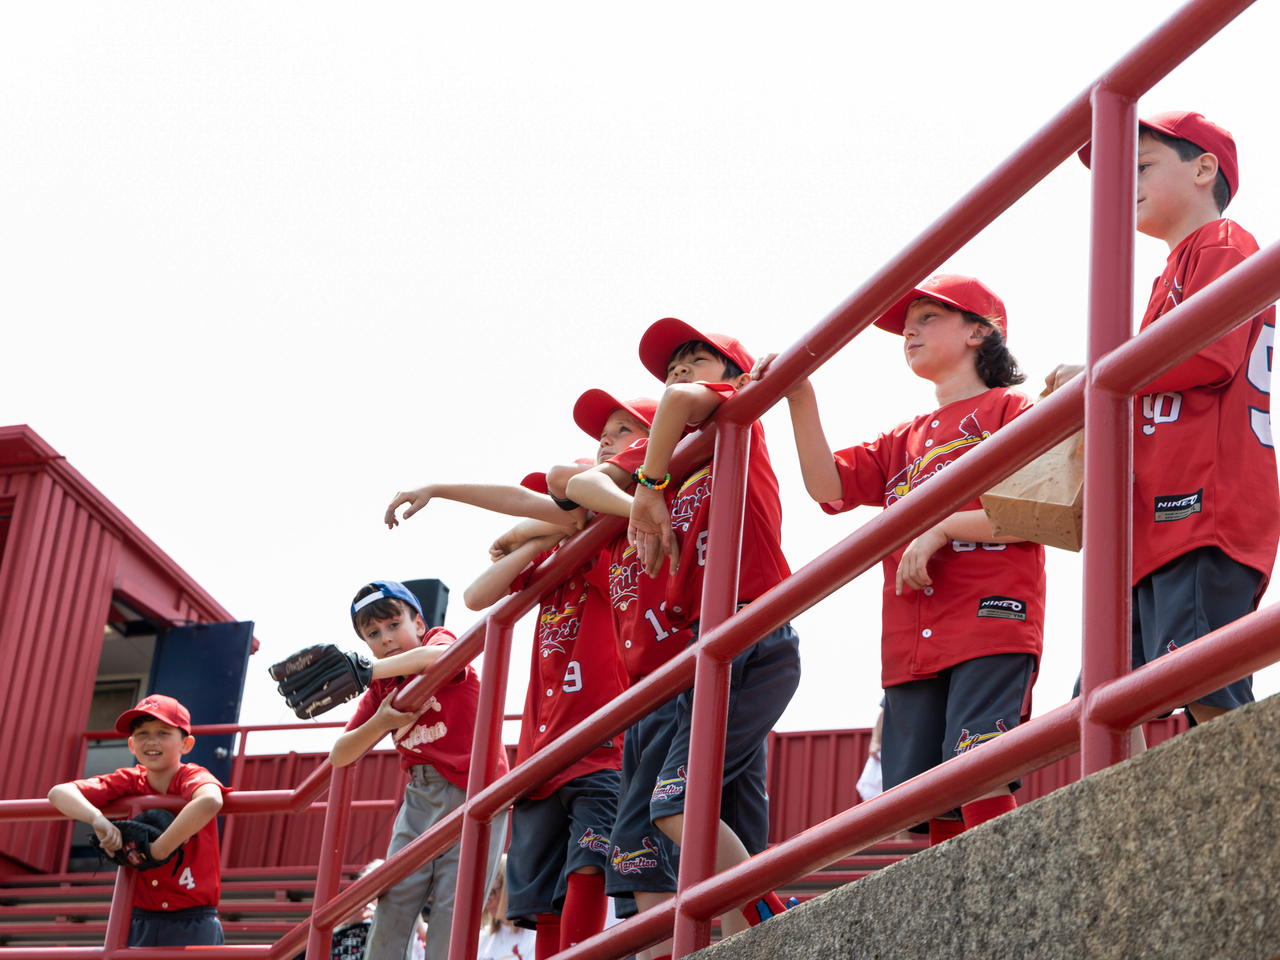 Group of kids lined up in the stands watching the game.